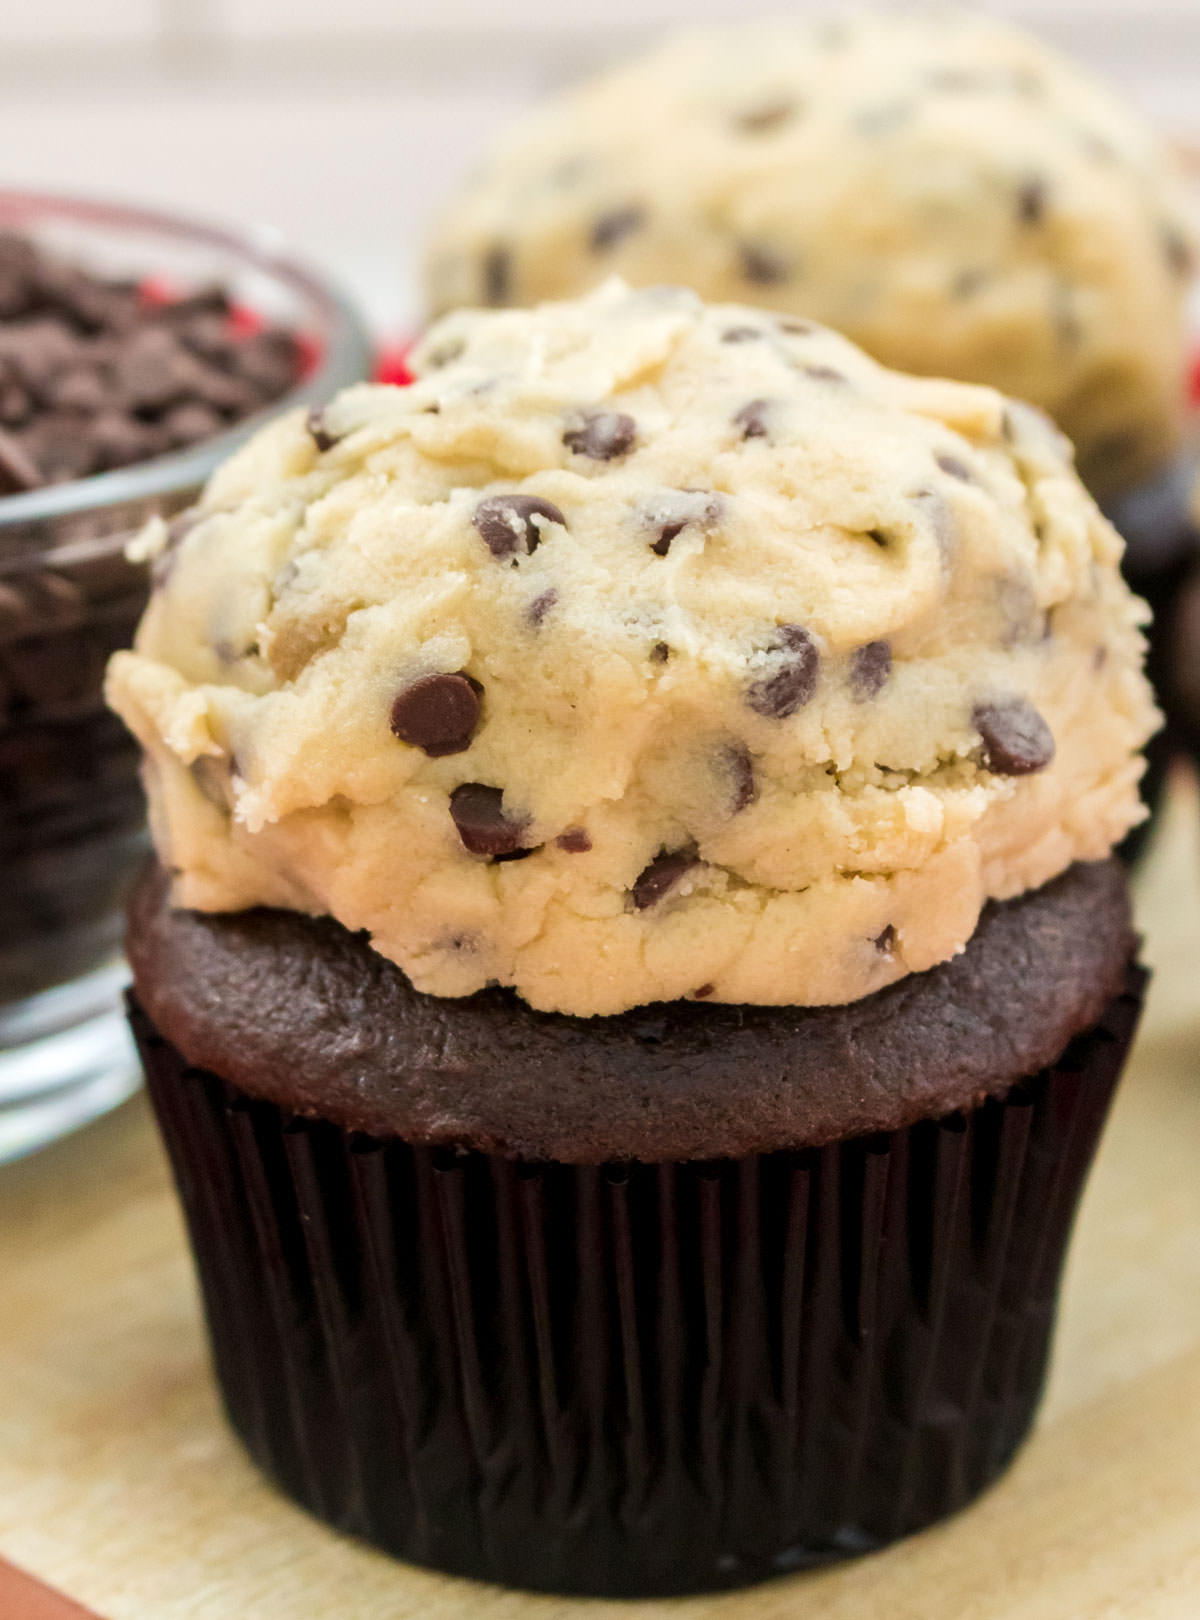 Closeup on a chocolate cupcake topped with a dollop of The Best Cookie Dough Frosting.